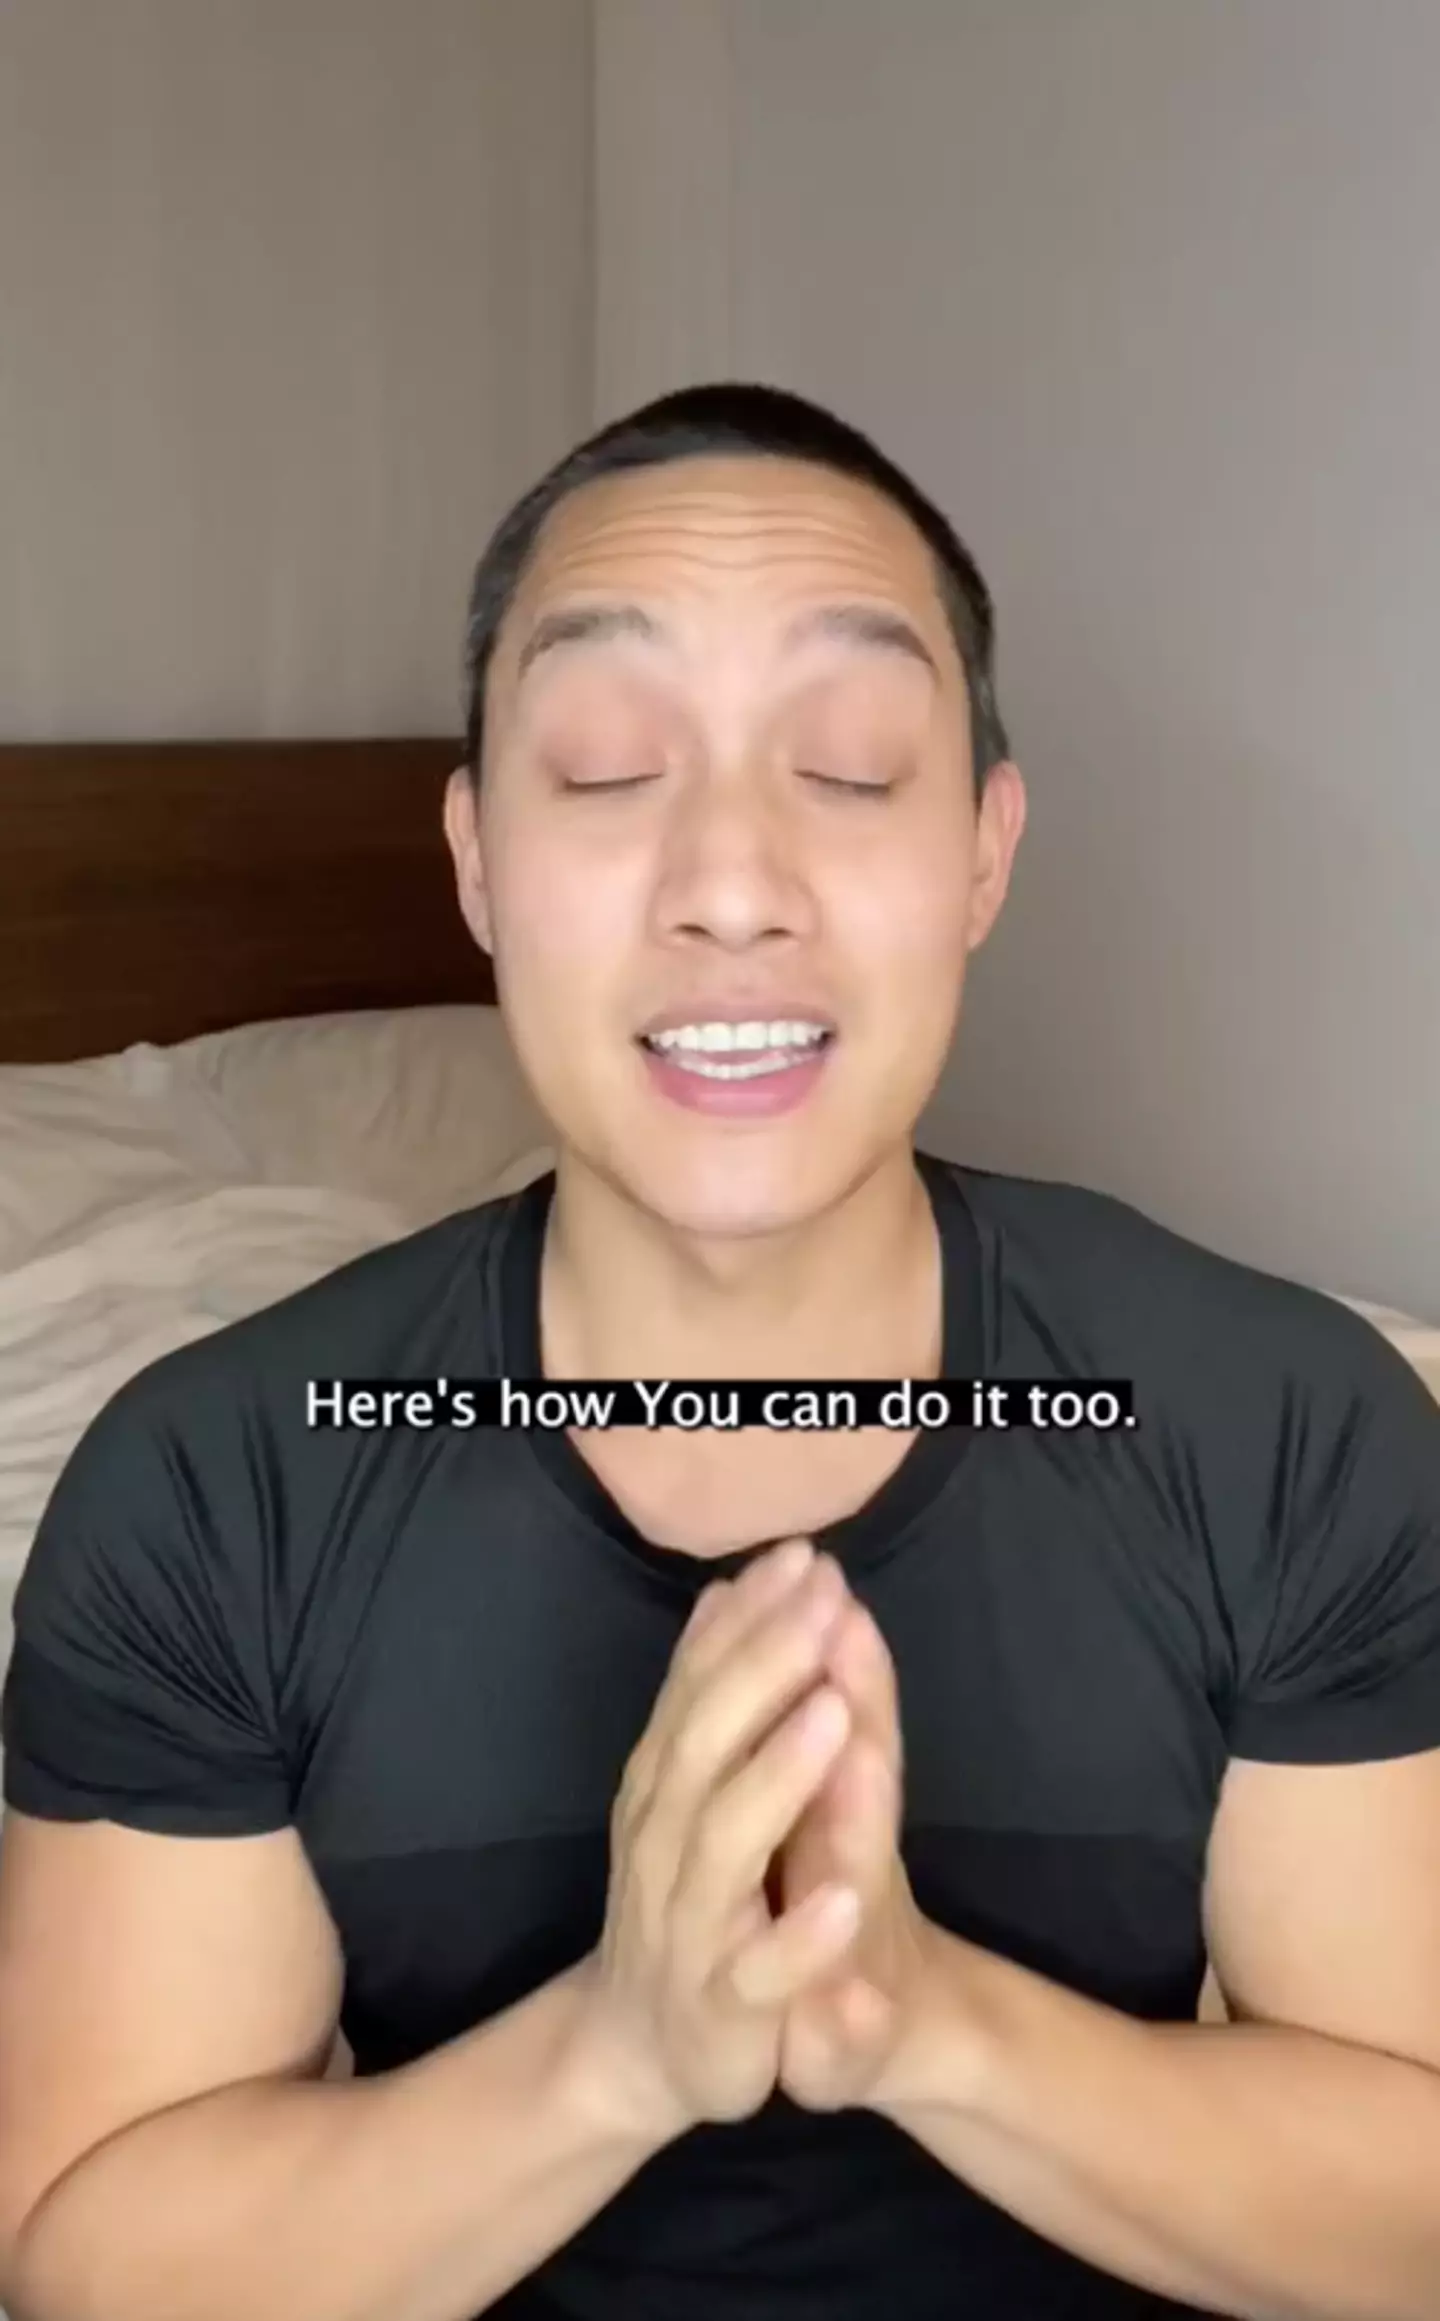 Justin Agustin shared the sleep hack with his TikTok following.